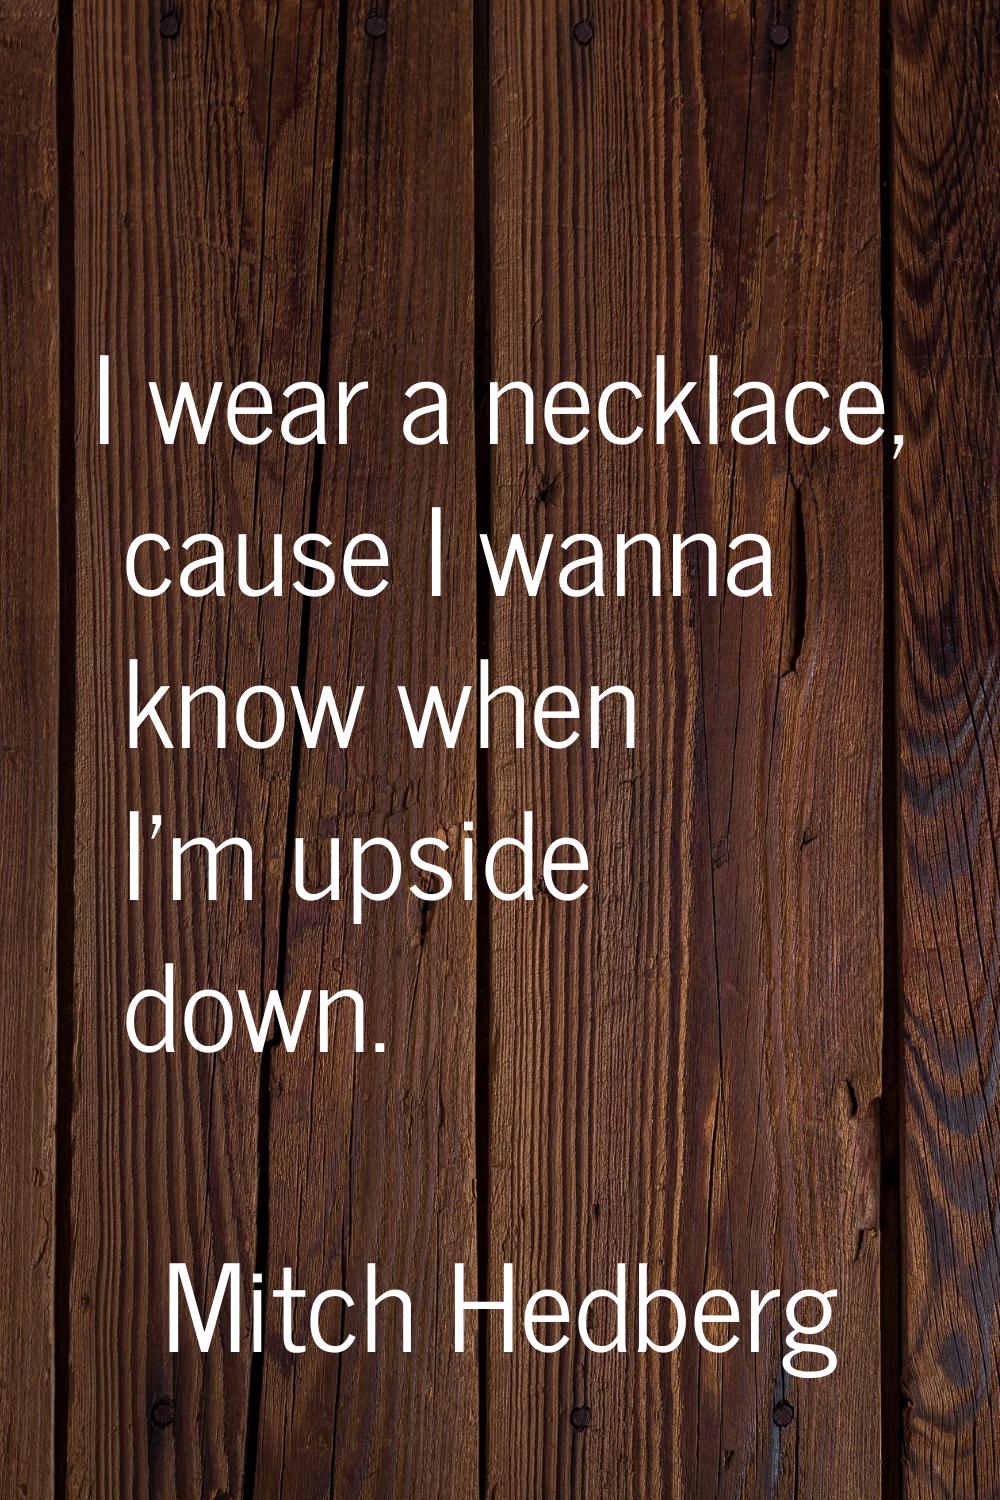 I wear a necklace, cause I wanna know when I'm upside down.